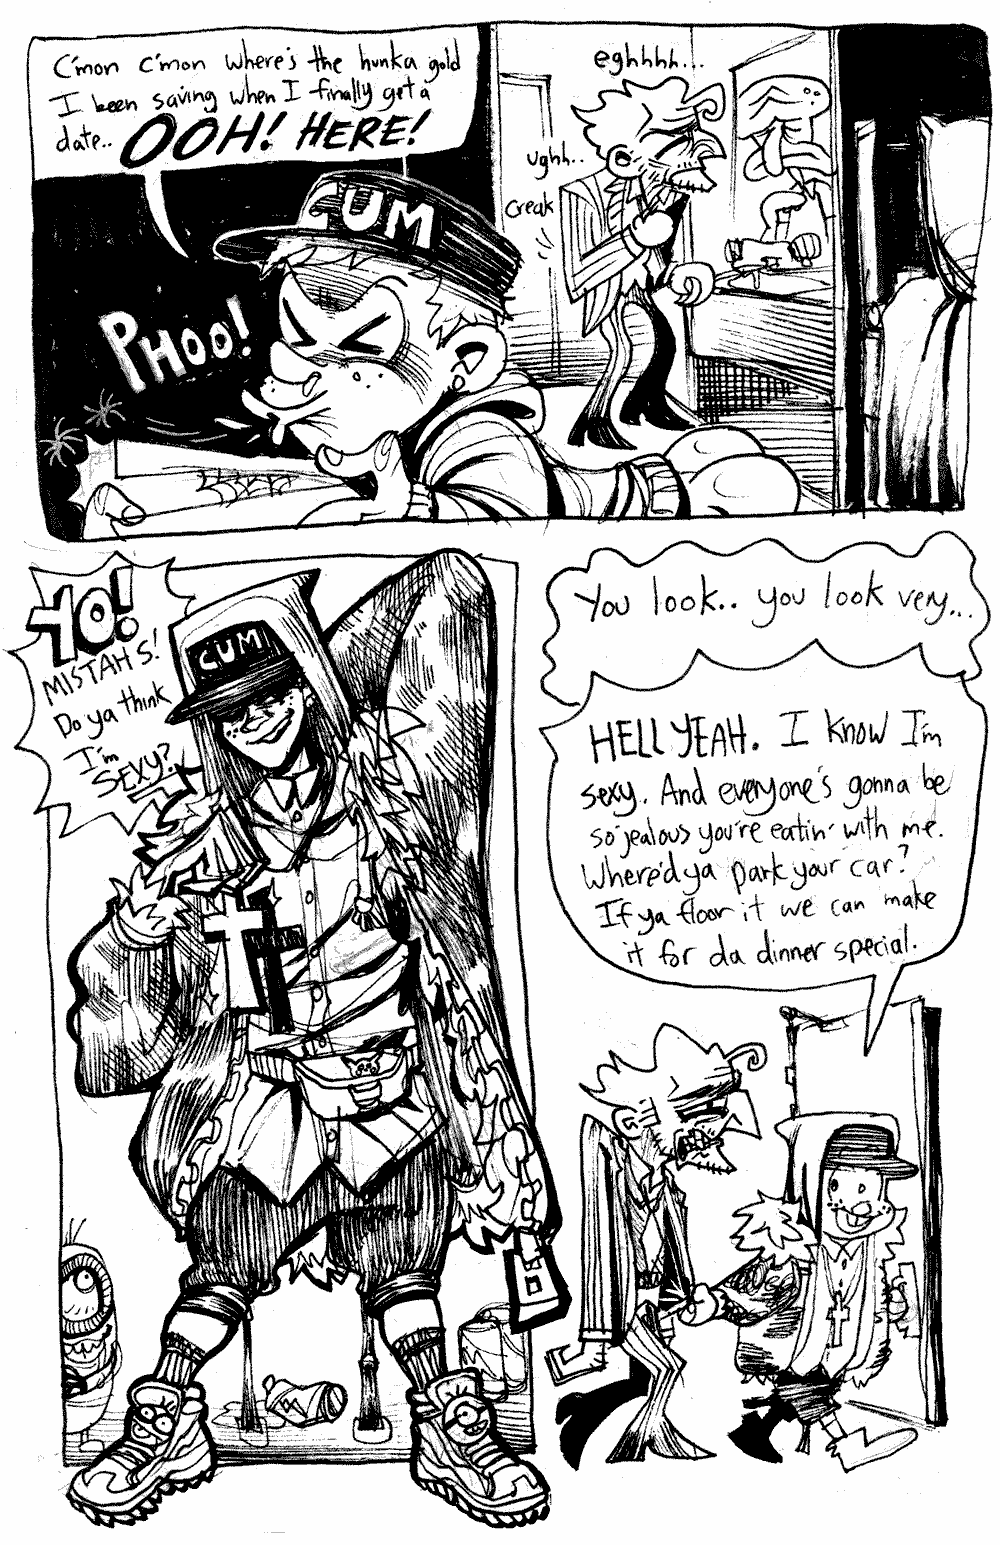 Page 19 - Back in the dorm, Basile changes back into his own clothes.  Ollie searches for his clothes.  'C'mon, c'mon where's the hunka gold I been saving when I finally get a date... OOH! HERE!'.  We get a full shot of Ollie's outfit, a mash of his hoodie, a baseball cap with the word CUM embroidered on the front, a fur-lined military coat, a collared shirt, a fanny pack, shorts, and minion sneakers.  'YO!  MISTAH S!  Do ya think I'm SEXY?'.  Basile grits his teeth and cringes.  'You look.. you look very..'.  No need to reply, as Ollie happily leads them out.  'HELL YEAH.  I'm know I'm sexy.  And everyone's gonna be so jealous you're eatin' with me.  Where'd ya park your car?  If ya floor it we can make it for da dinner special.